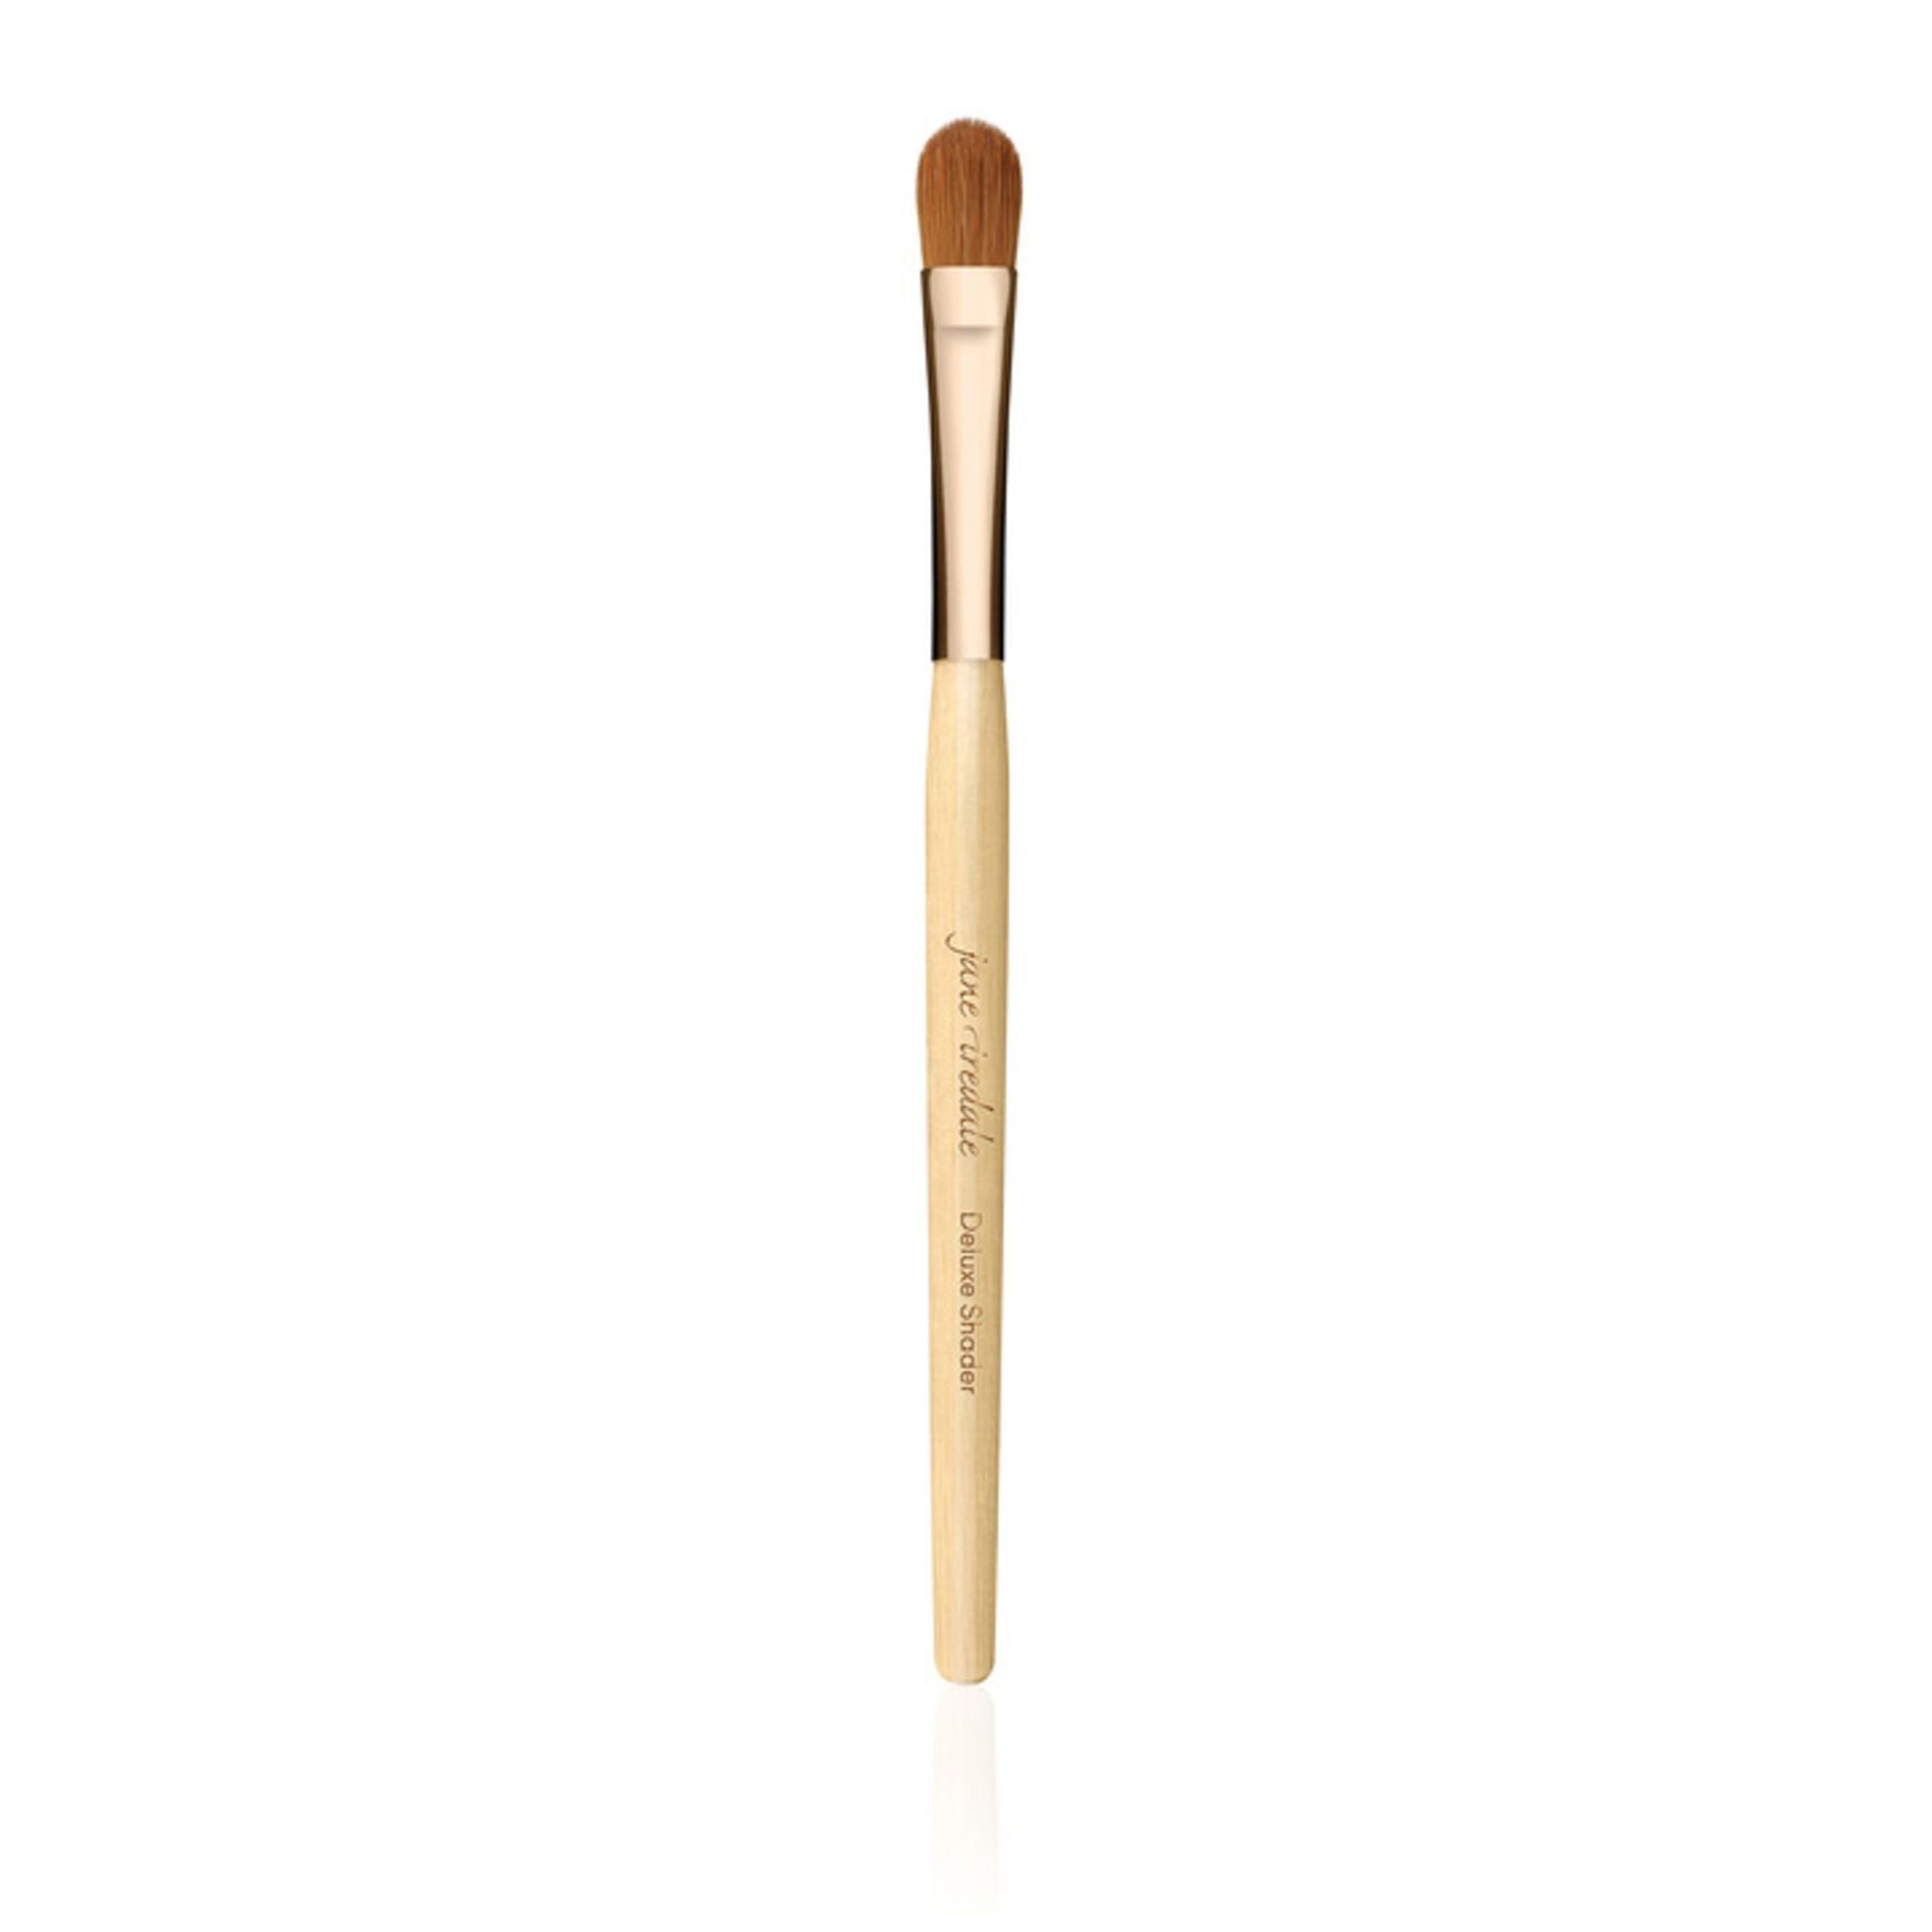 JANE IREDALE DELUXE SHADER